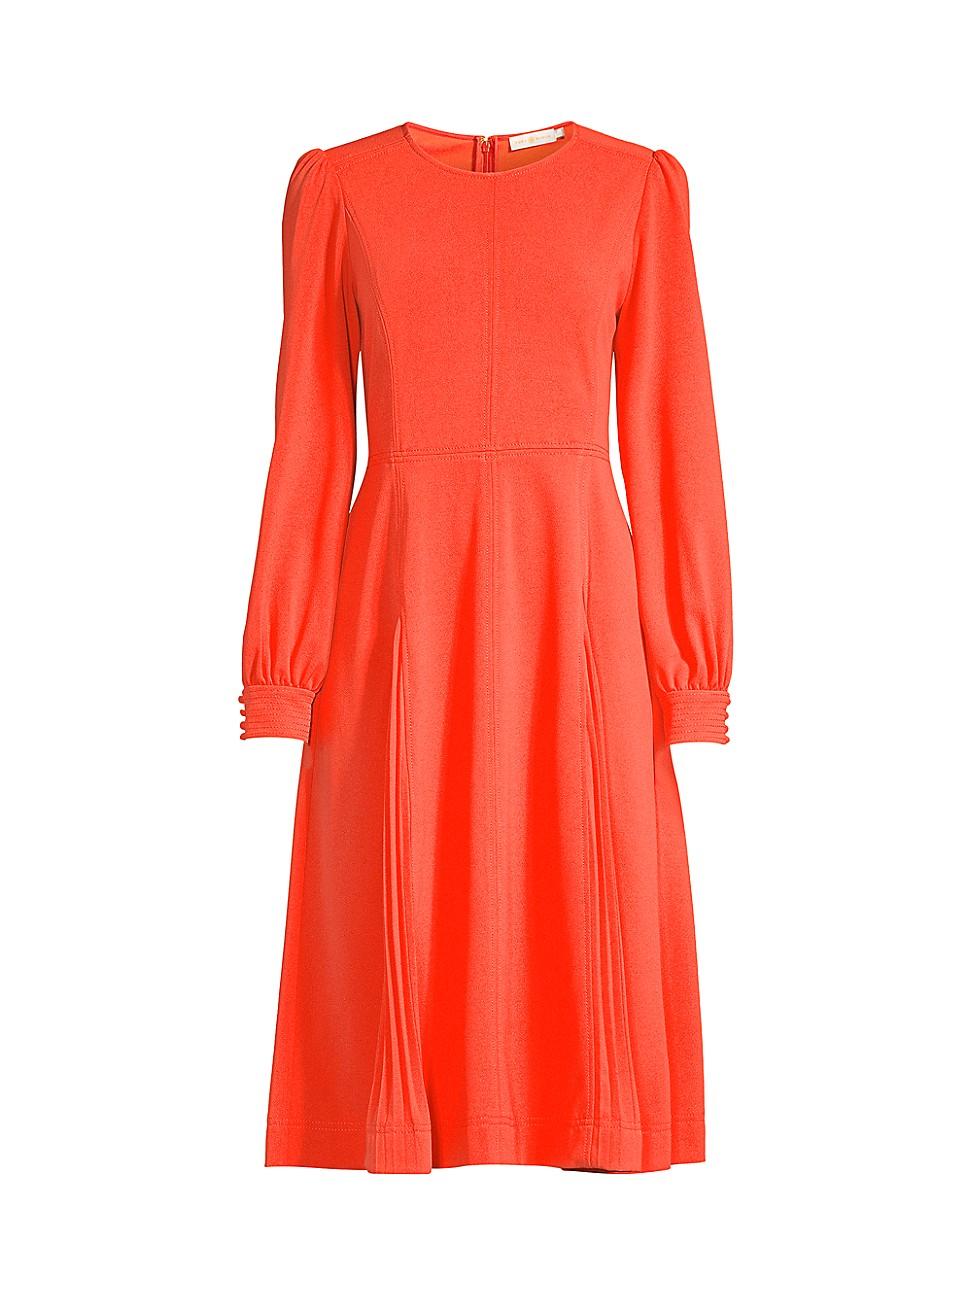 Tory Burch Knit Crepe Midi Dress in Red | Lyst